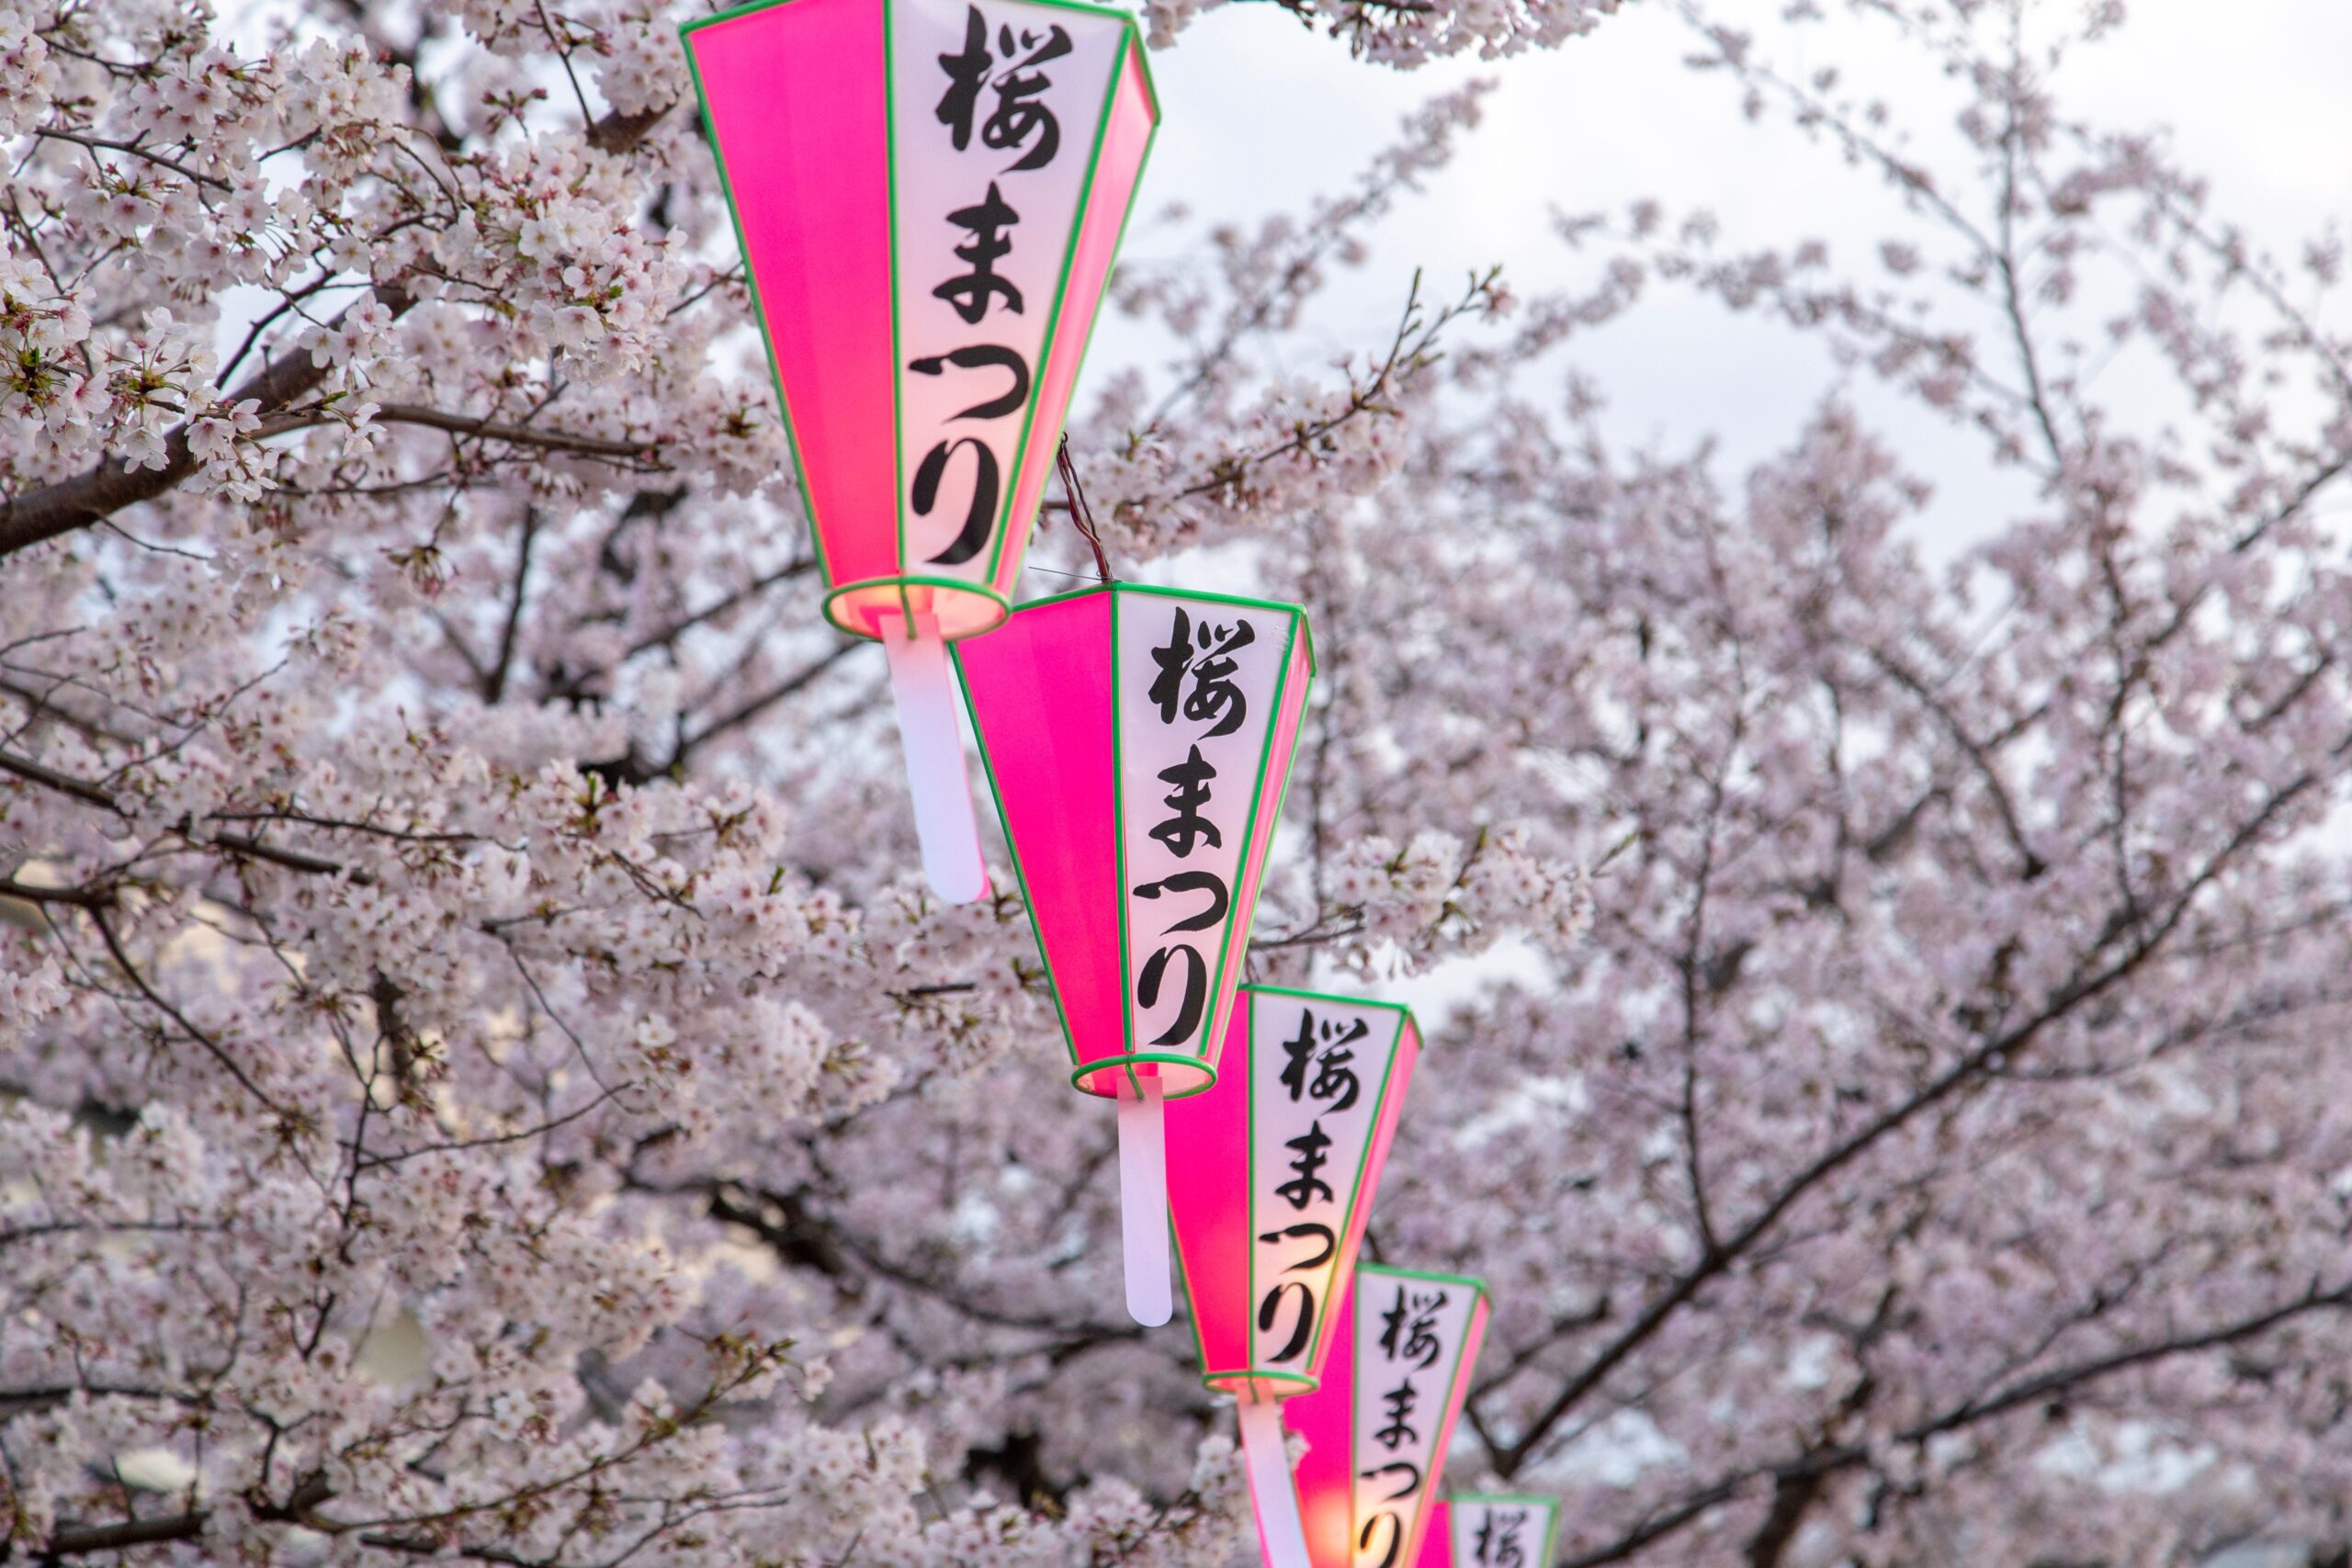 Japanese Cherry Blossoms can be viewed from many beautiful locations in Japan. 
pictured: bright pink lanterns that line blush pink rows of cherry blossom trees in Japan